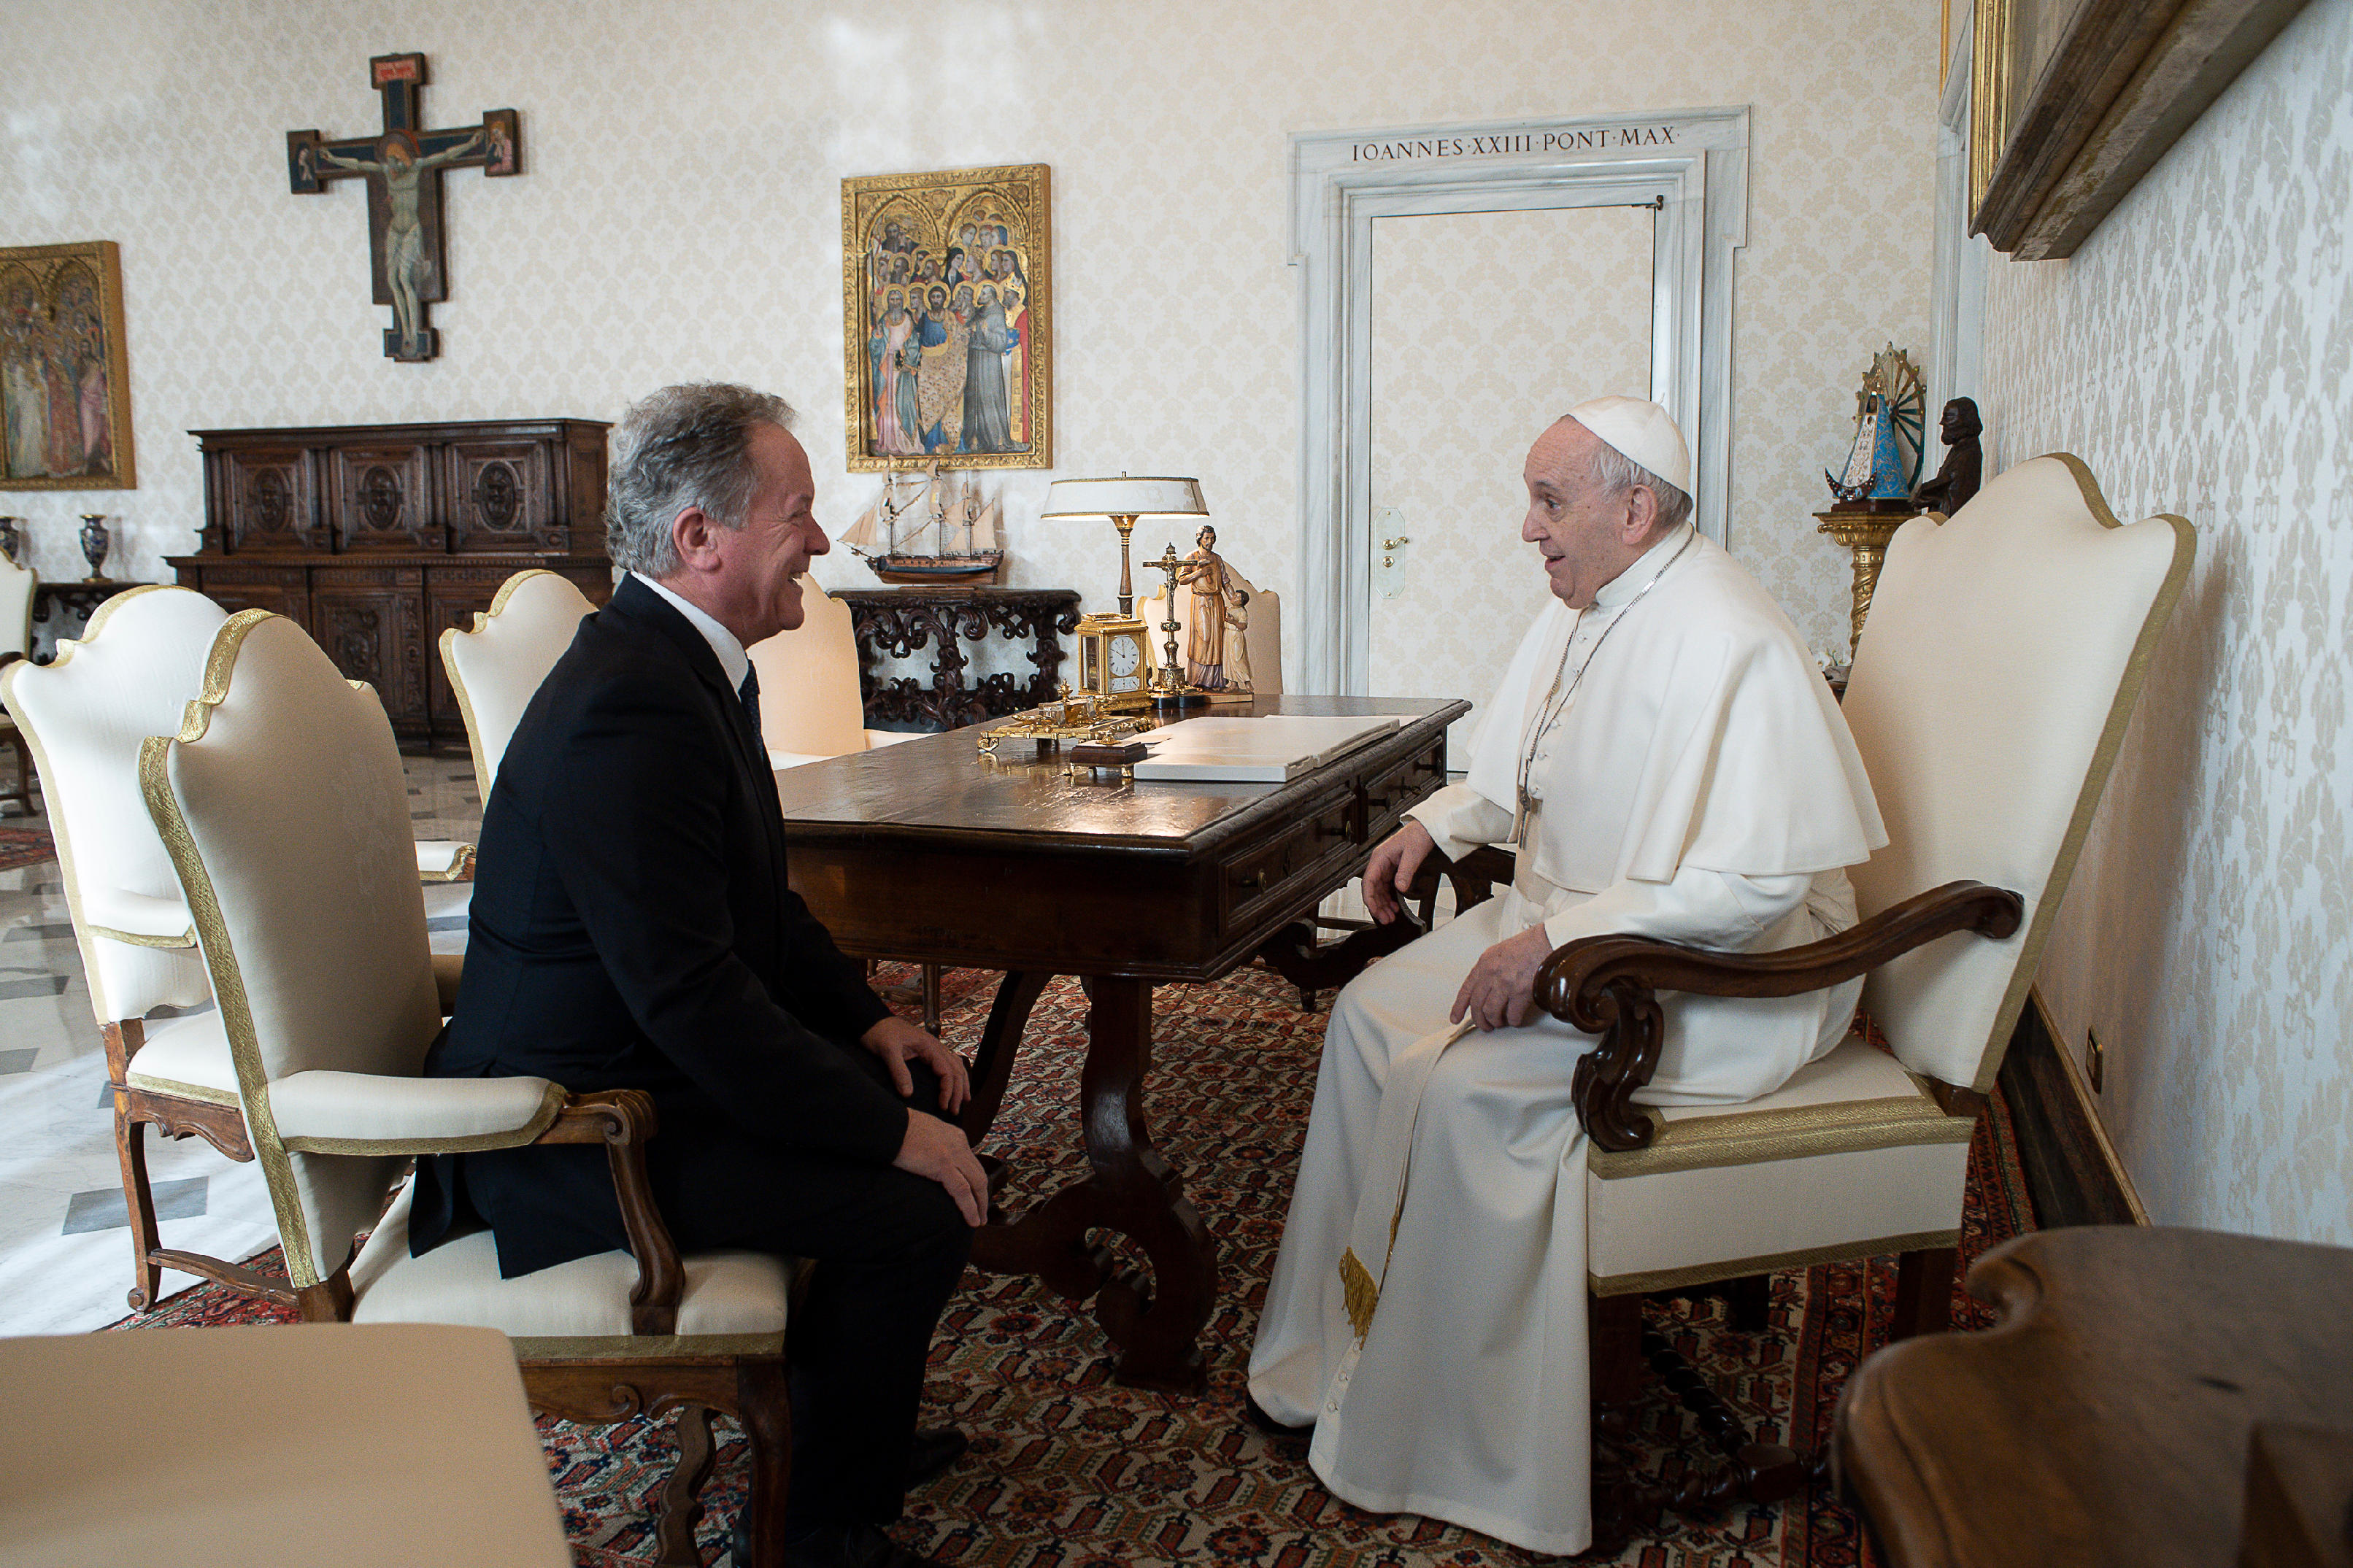 Mr. David Beasley Executive Director, World Food Programme Private Audience with his Holiness Pope Francis, Photo: L’Osservatore Romano 